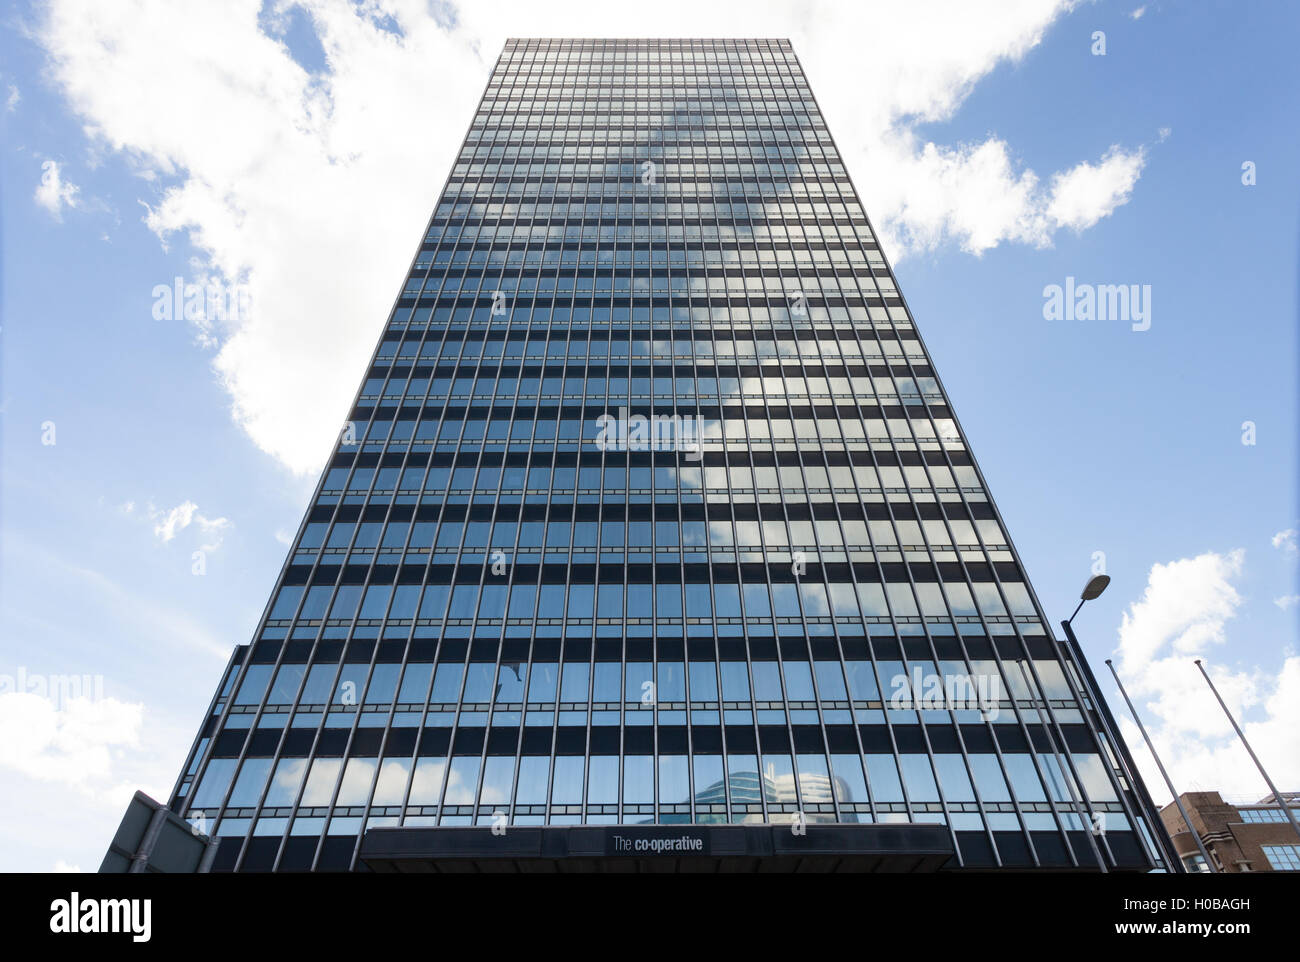 The headquarters of the CIS Insurance Group, Manchester, built in 1962 it was briefly the tallest building in the UK. Stock Photo